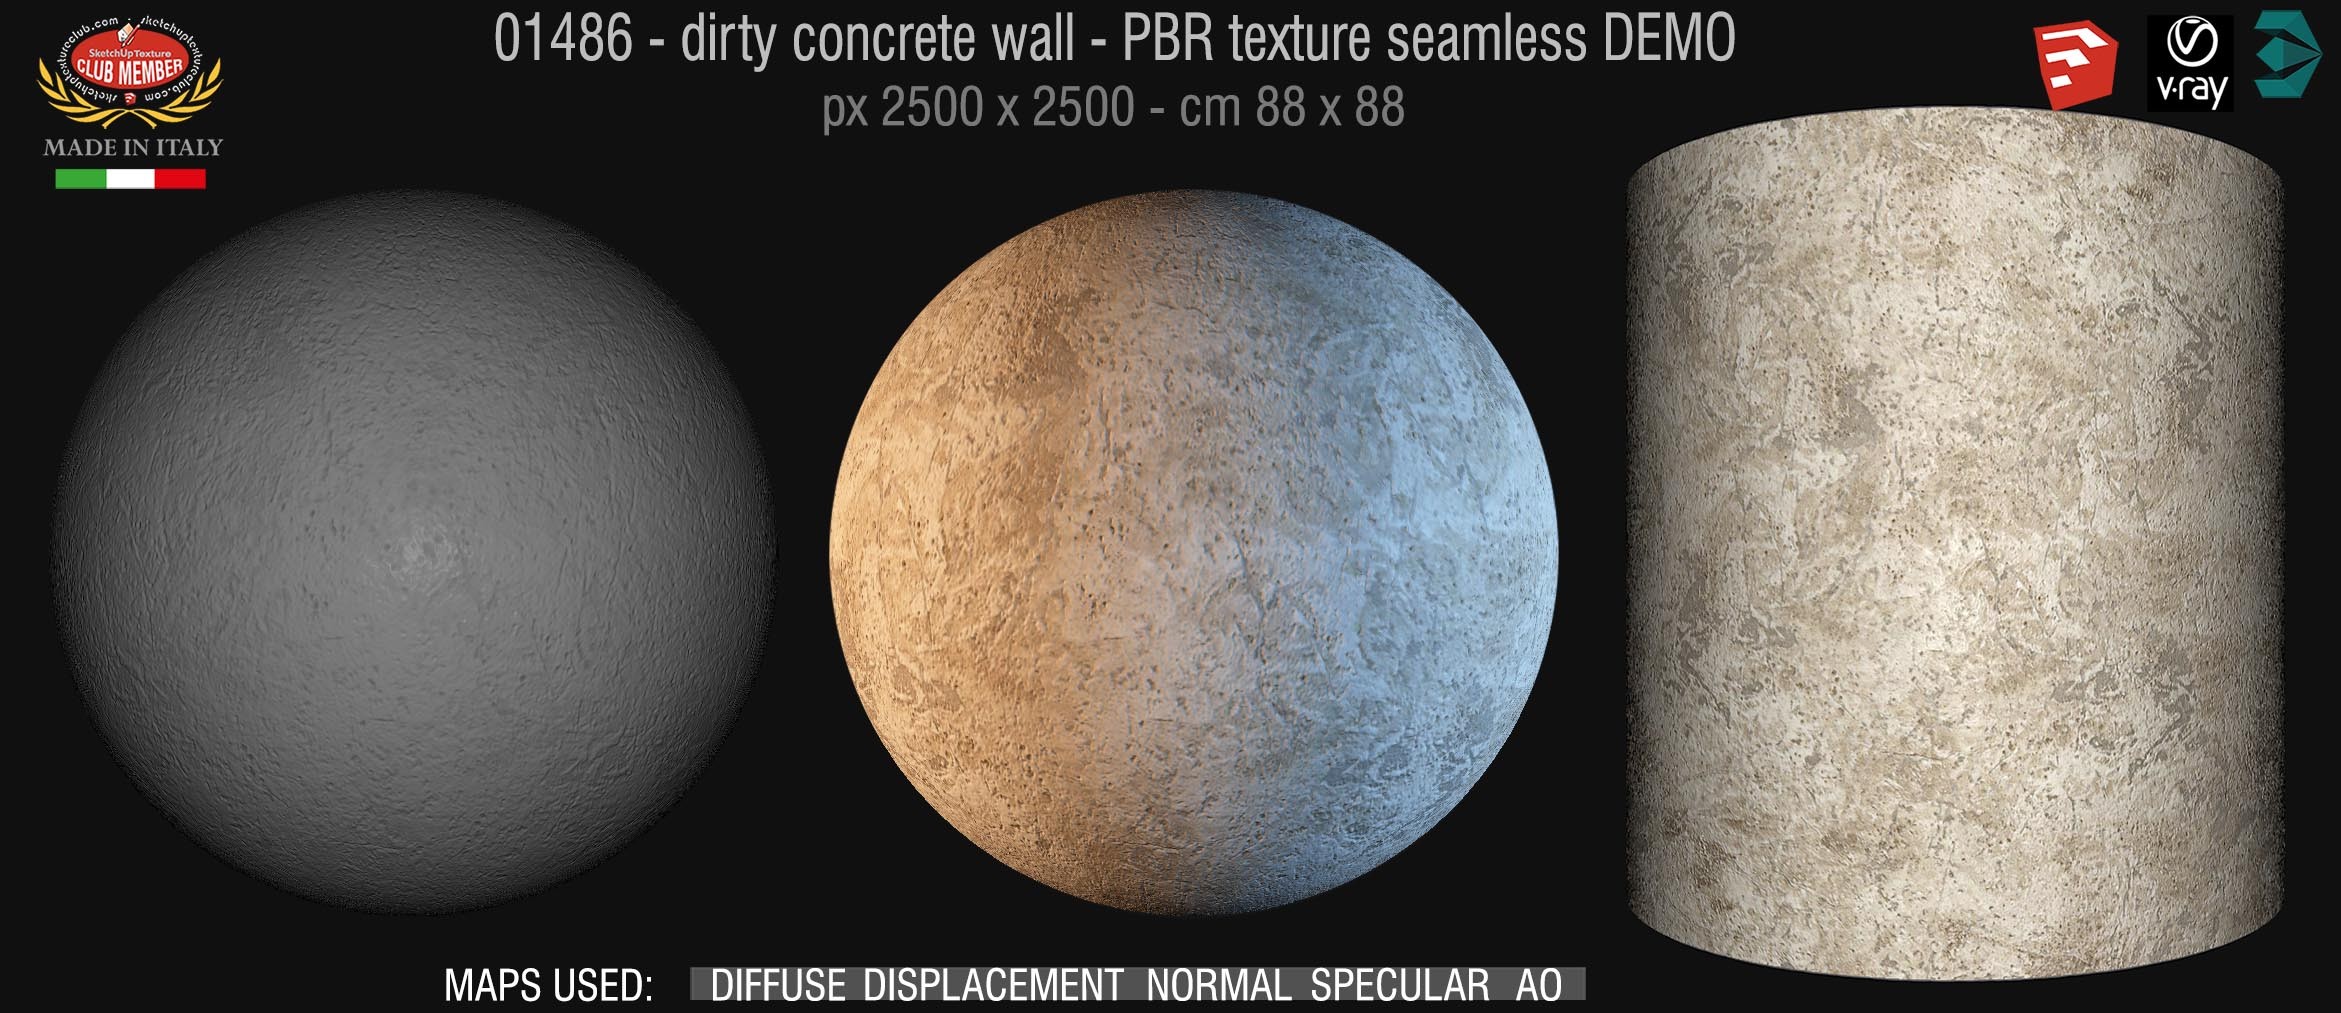 01486 Concrete bare dirty wall PBR texture seamless DEMO